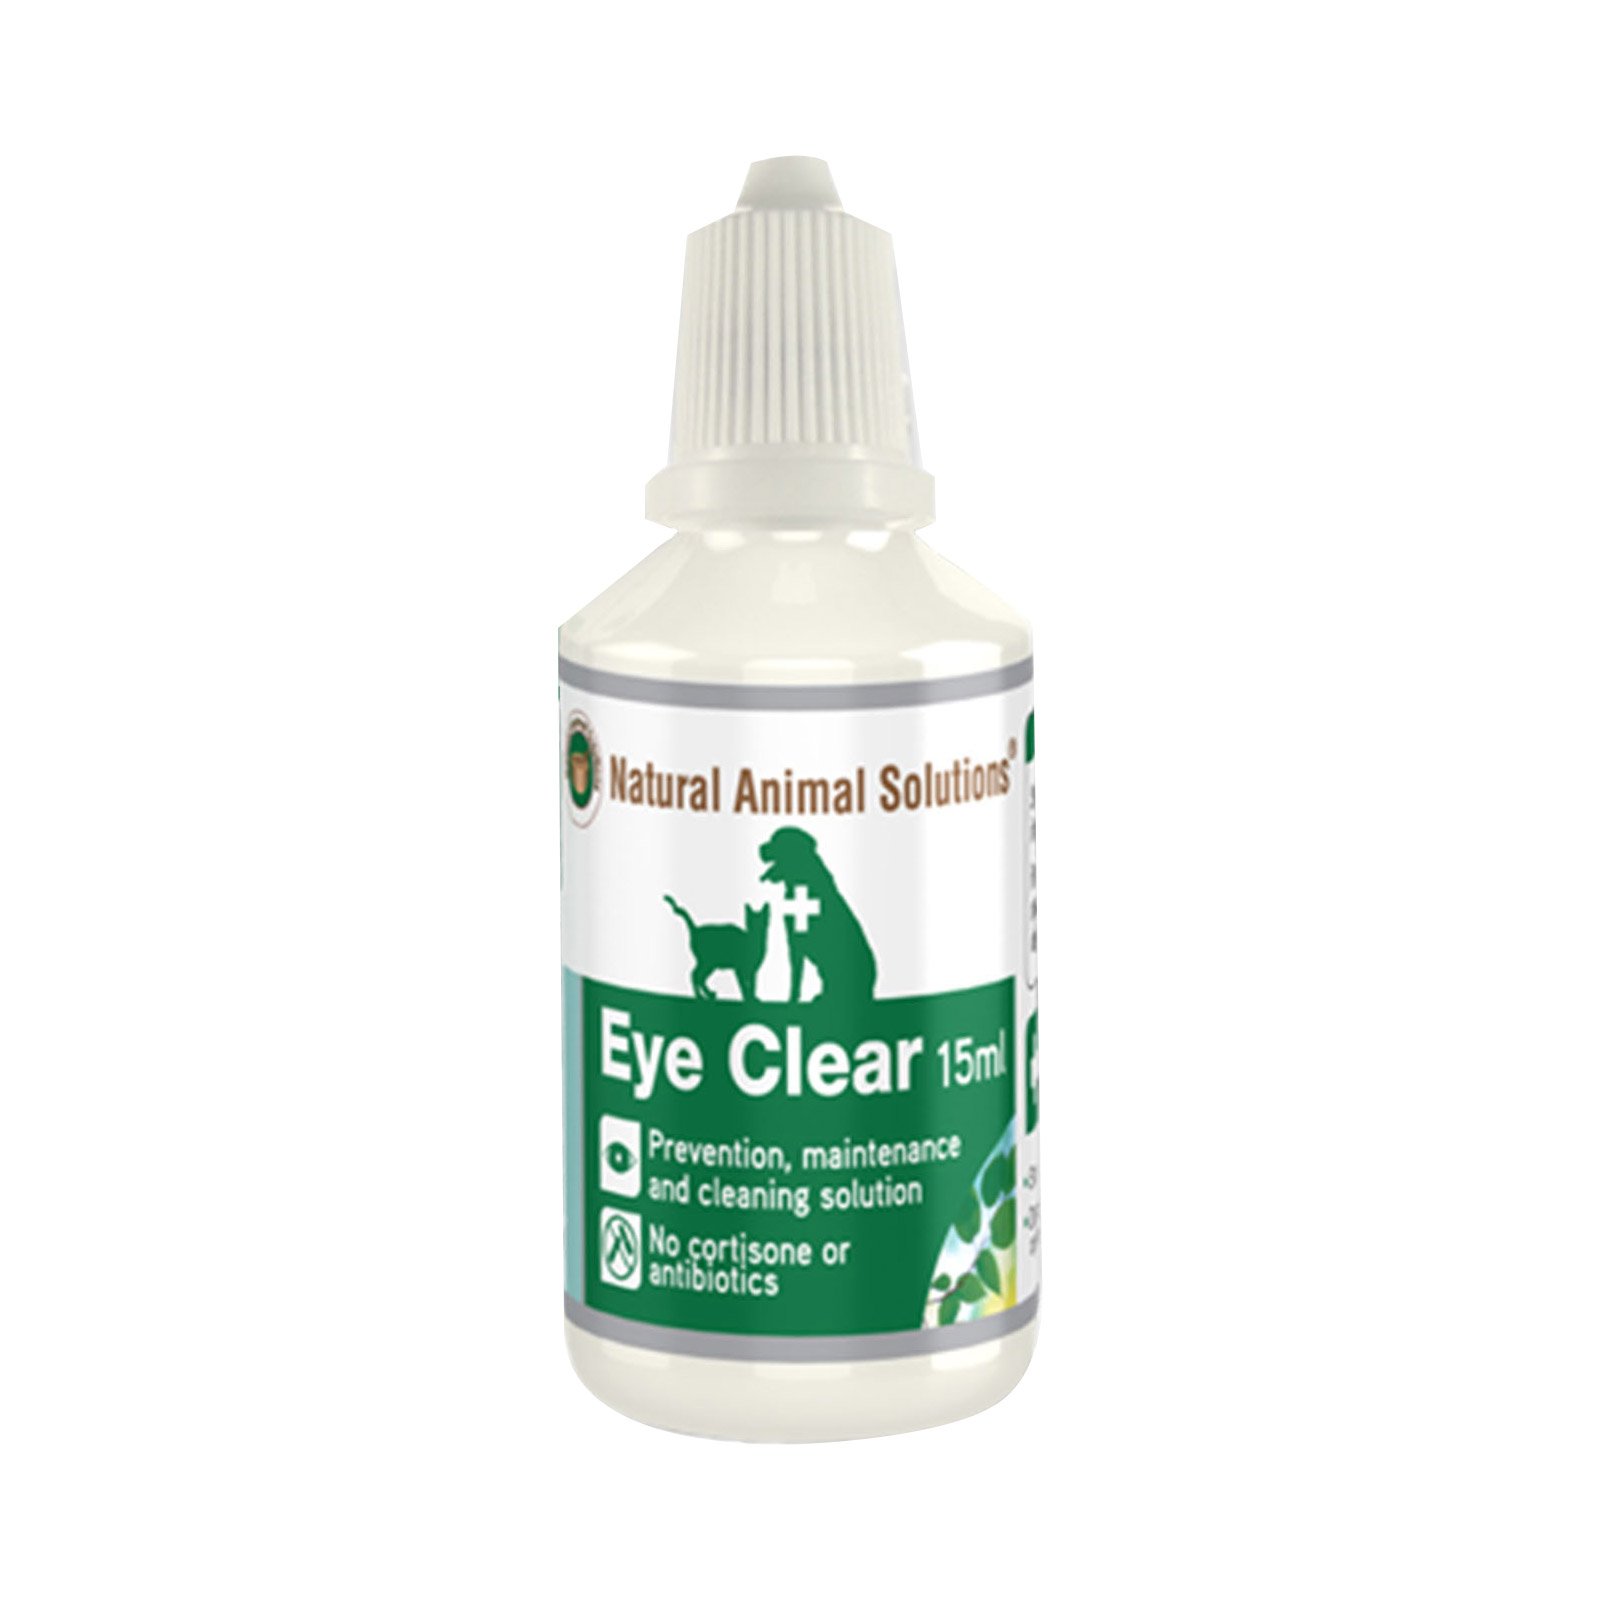 Natural Animal Solutions Eye Clear 